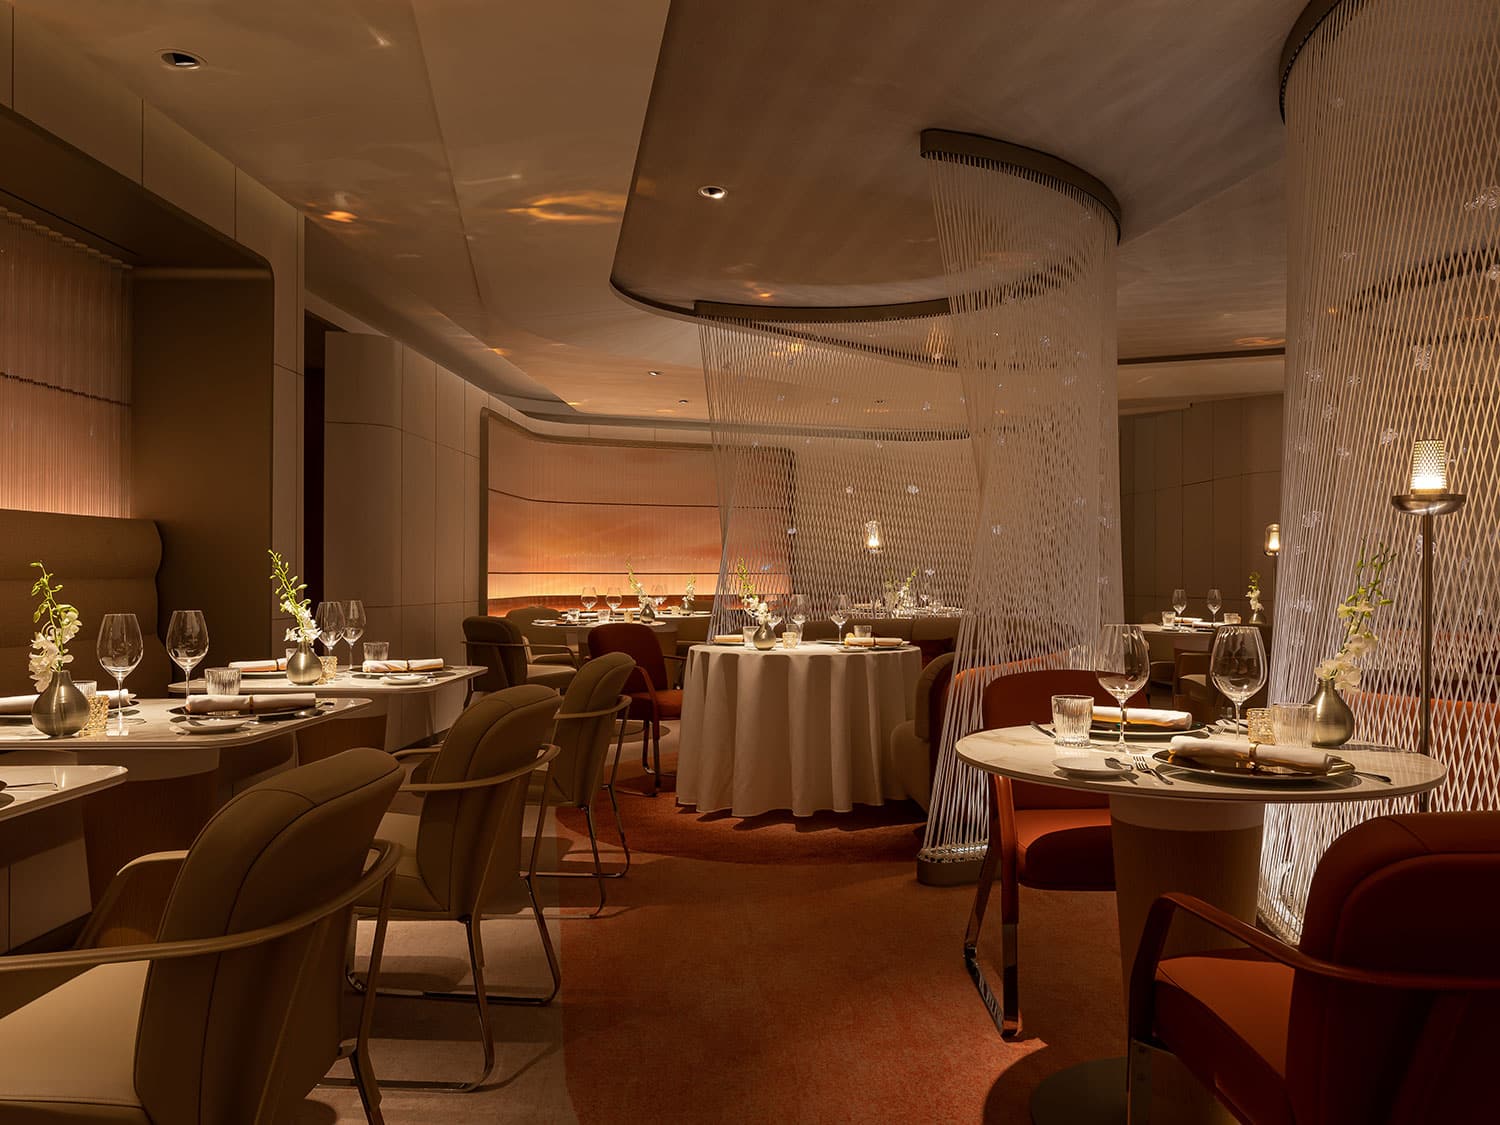 An interior view of Chef Daniel Boulud’s Le Voyage restaurant on Celebrity Beyond from Celebrity Cruises.